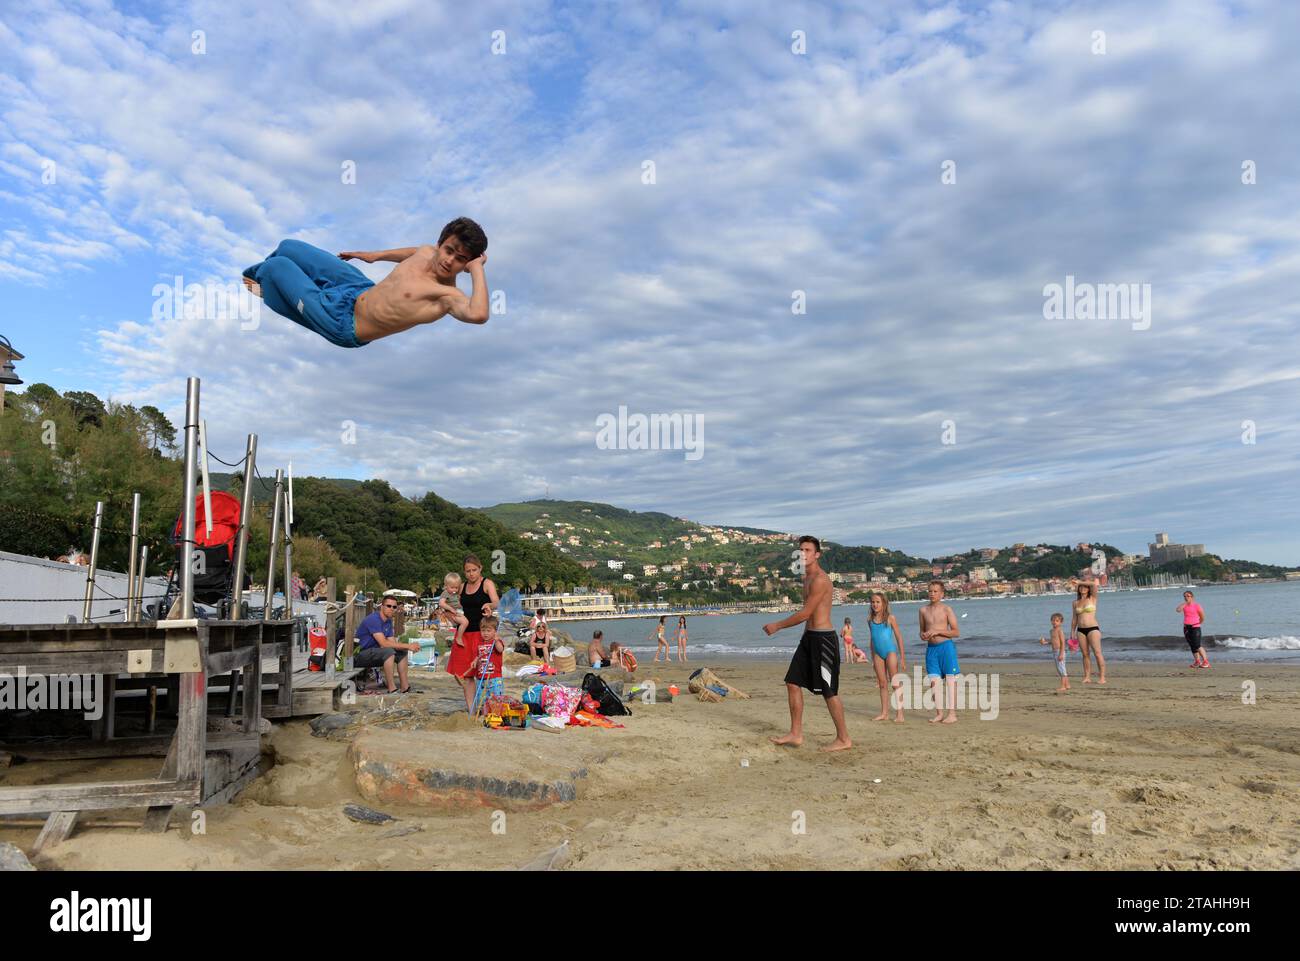 LERICI, ITALY - JUNE 15, 2016: Guy jumping on the beach in Lerici, Italy. Stock Photo